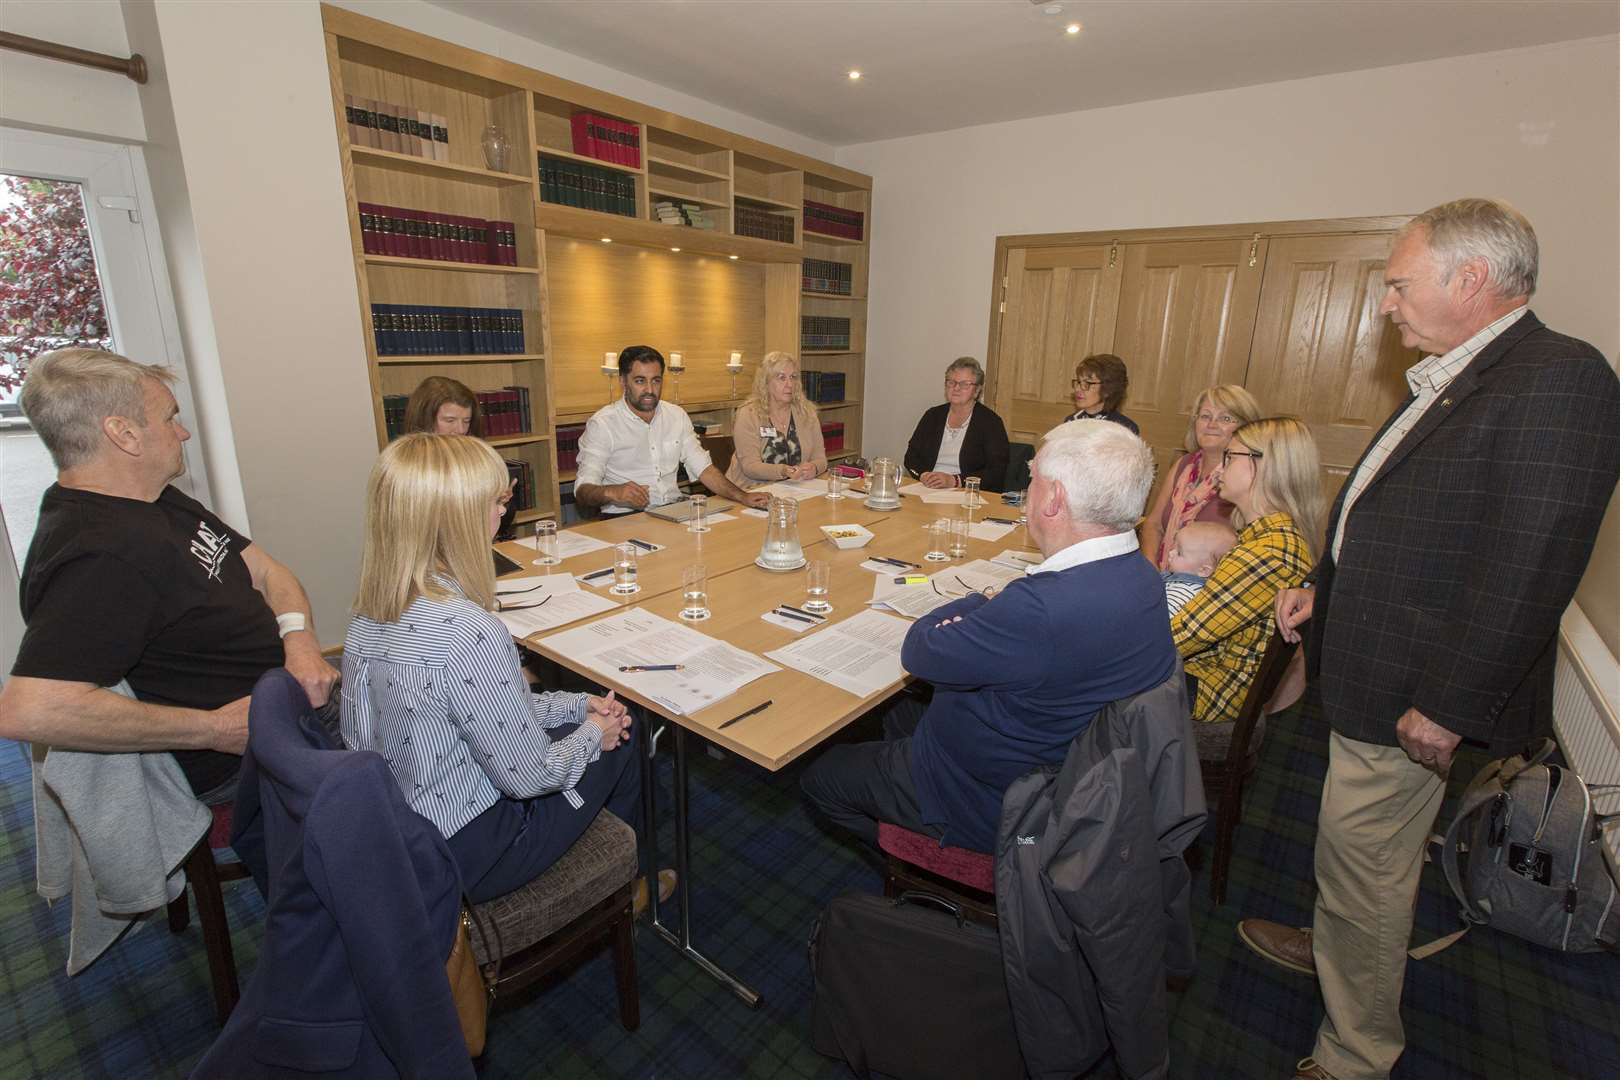 Scotland's health secretary Humza Yousaf meeting Ron Gunn (right) and other members of Caithness Health Action Team in Wick's Norseman Hotel. Picture: Robert MacDonald / Northern Studios